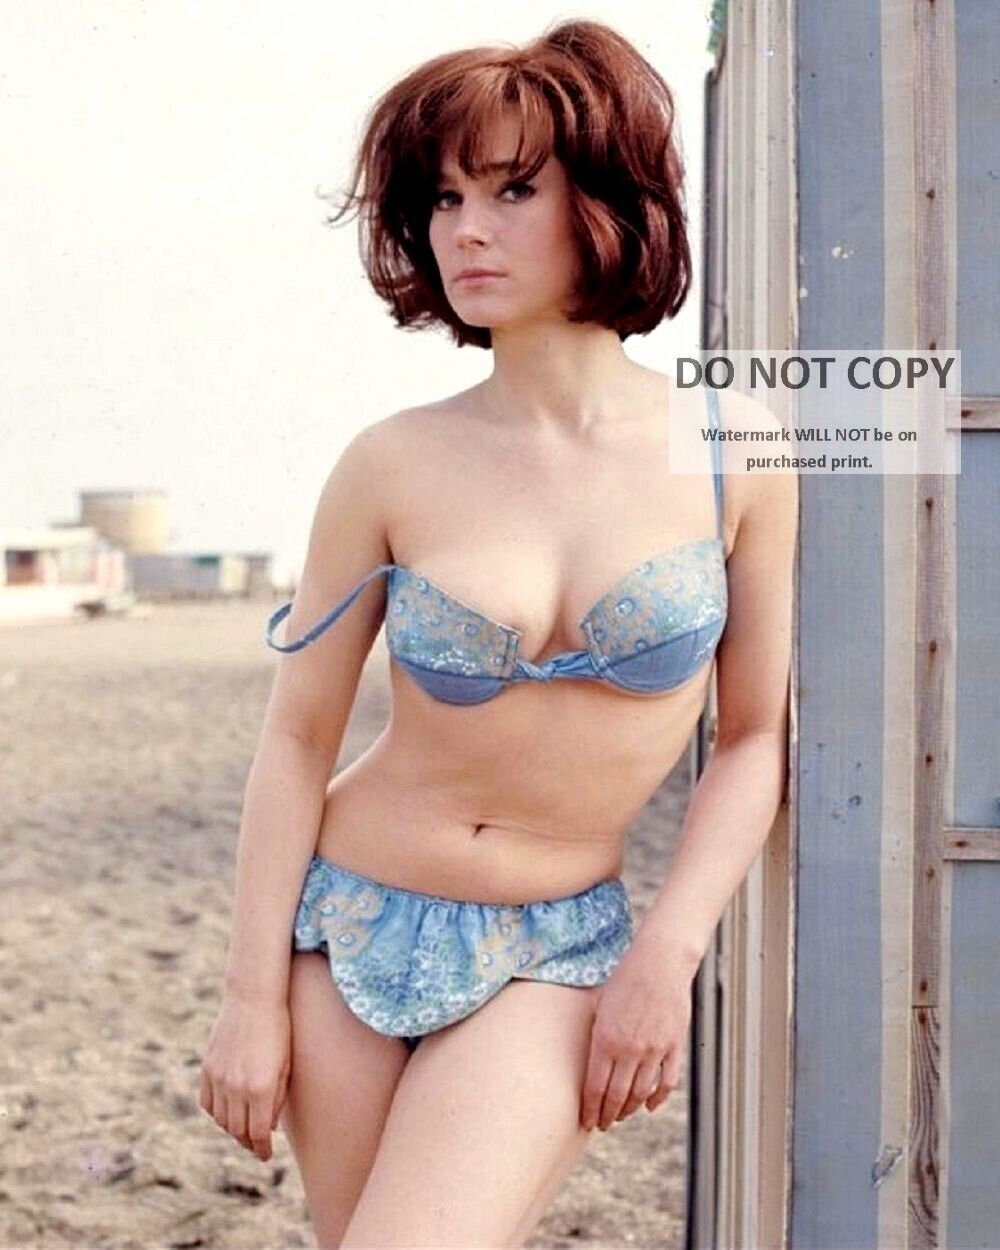 SHIRLEY ANNE FIELD ENGLISH ACTRESS PIN UP - 8X10 PUBLICITY PHOTO (MW311)